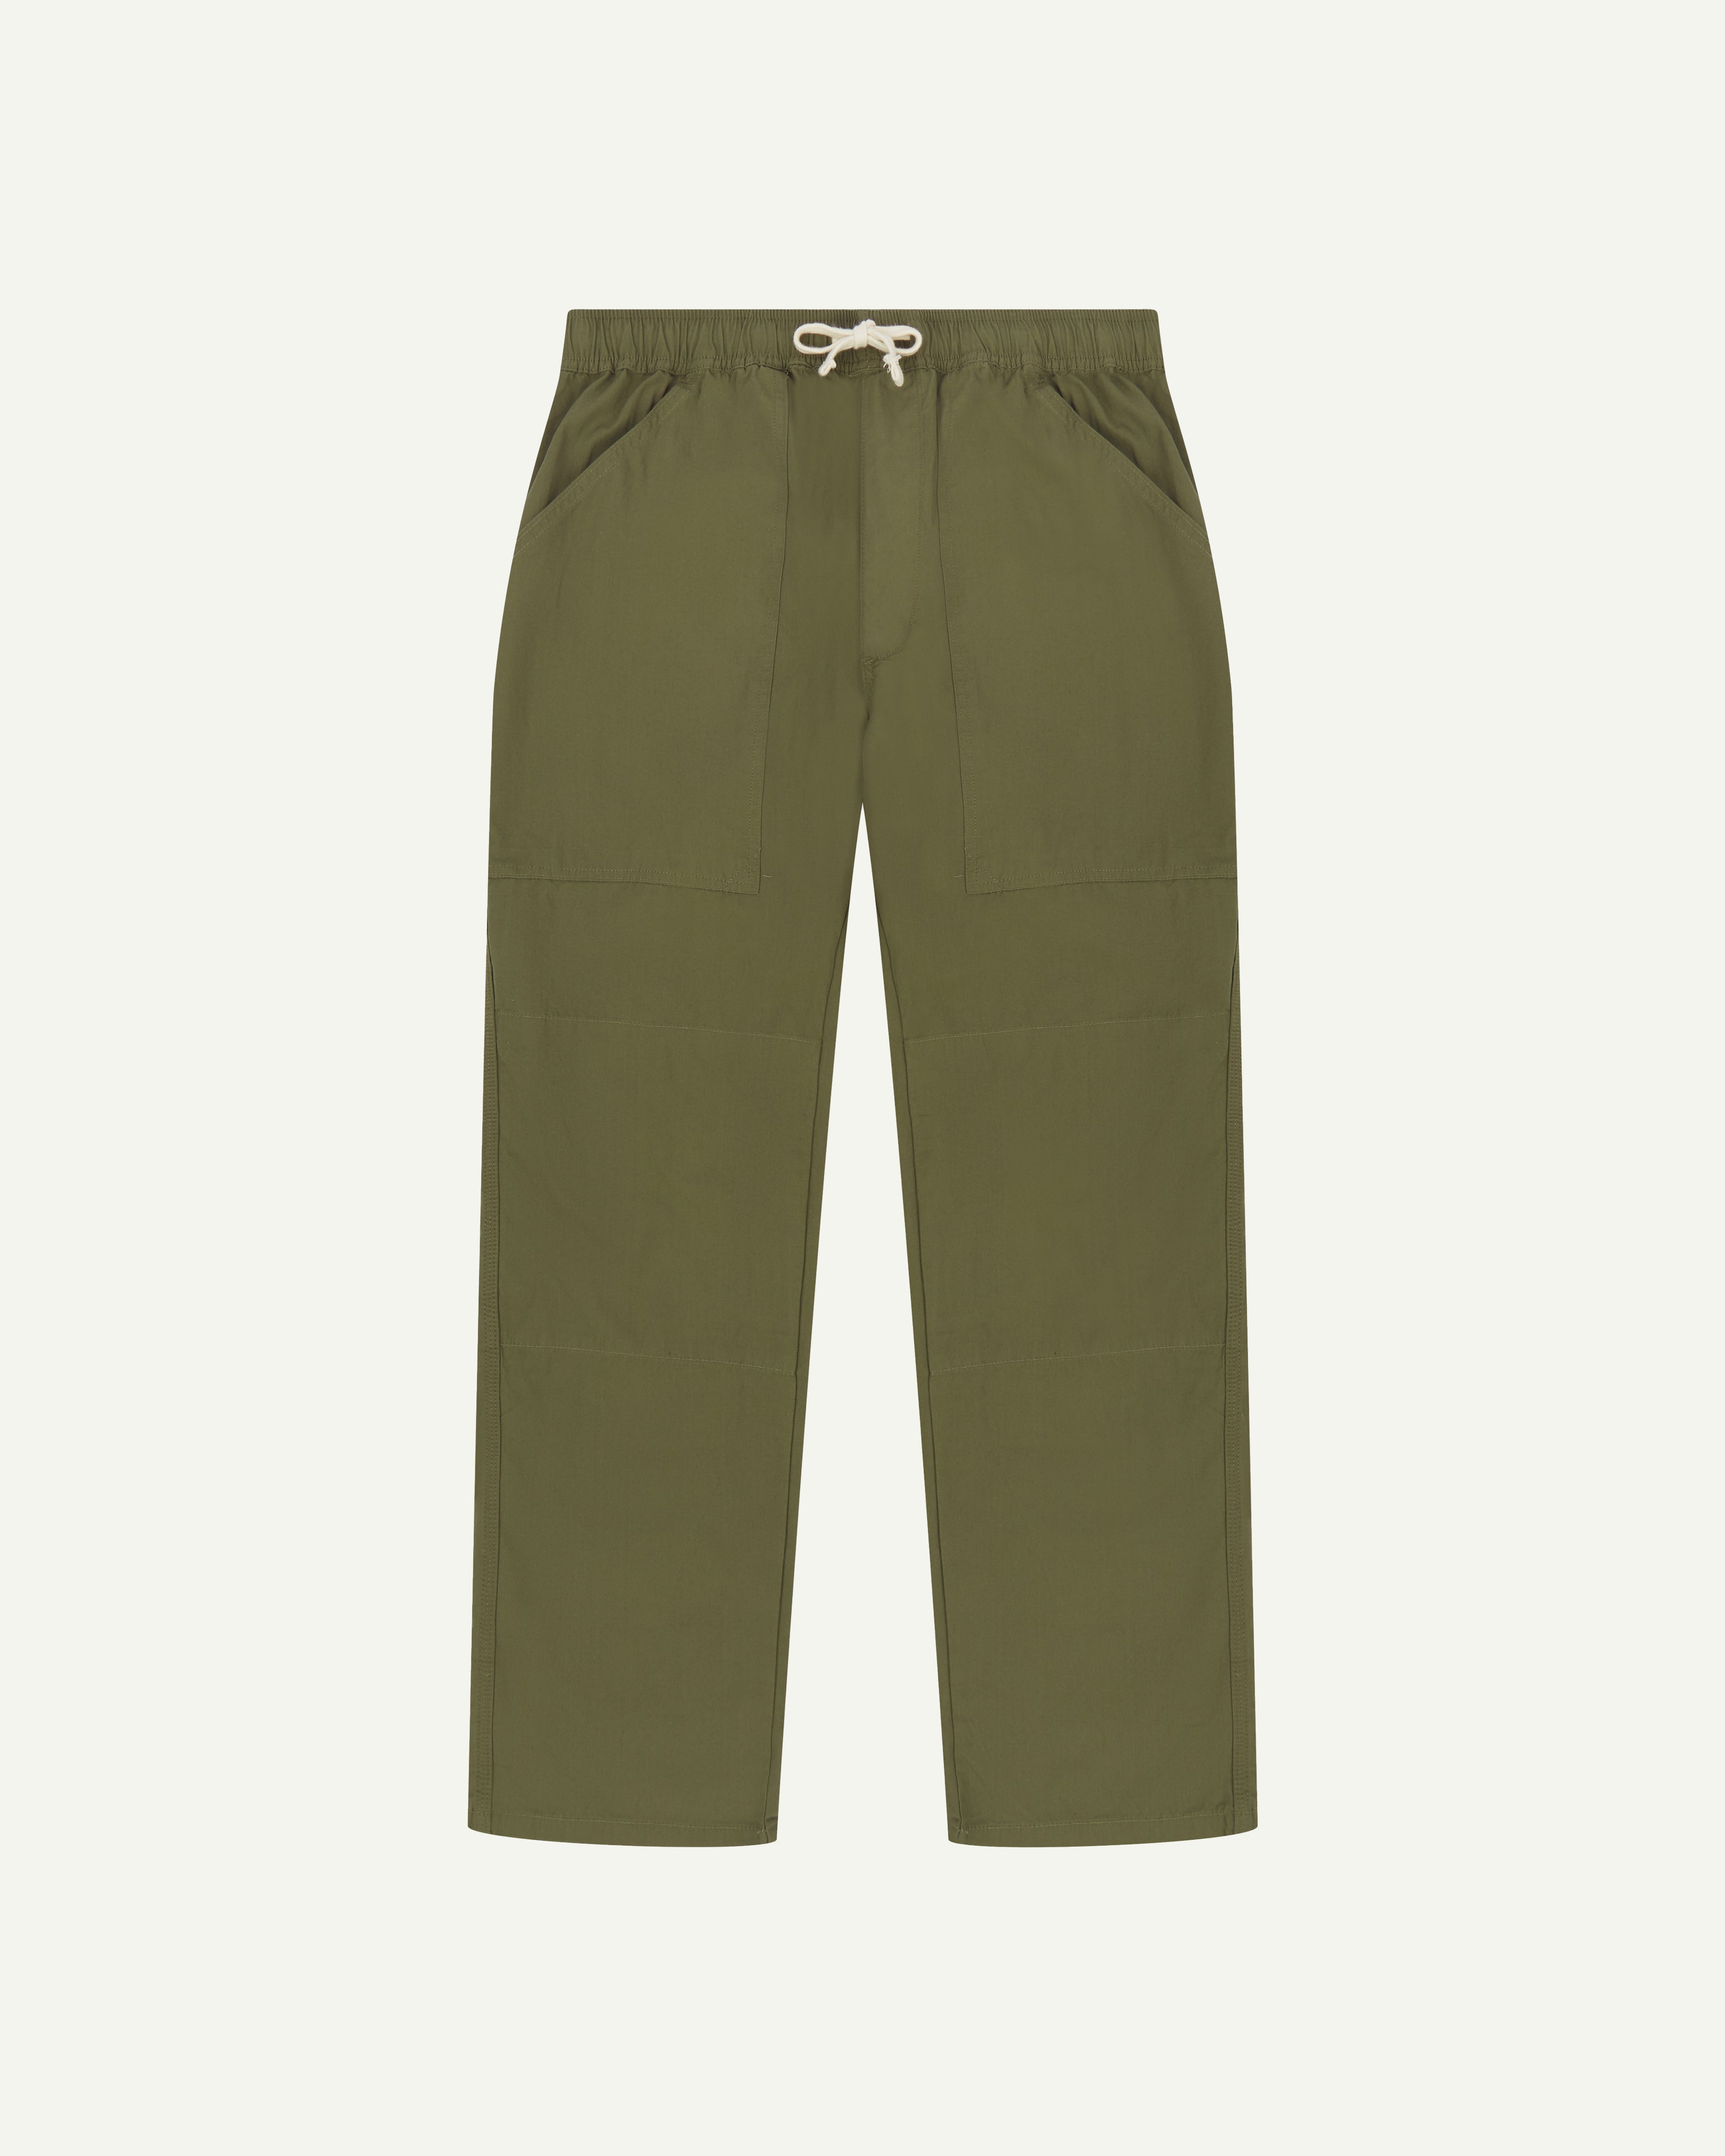 Flat front shot of the Uskees 5020 olive lightweight utility pants showing drawstring waist and large front pockets